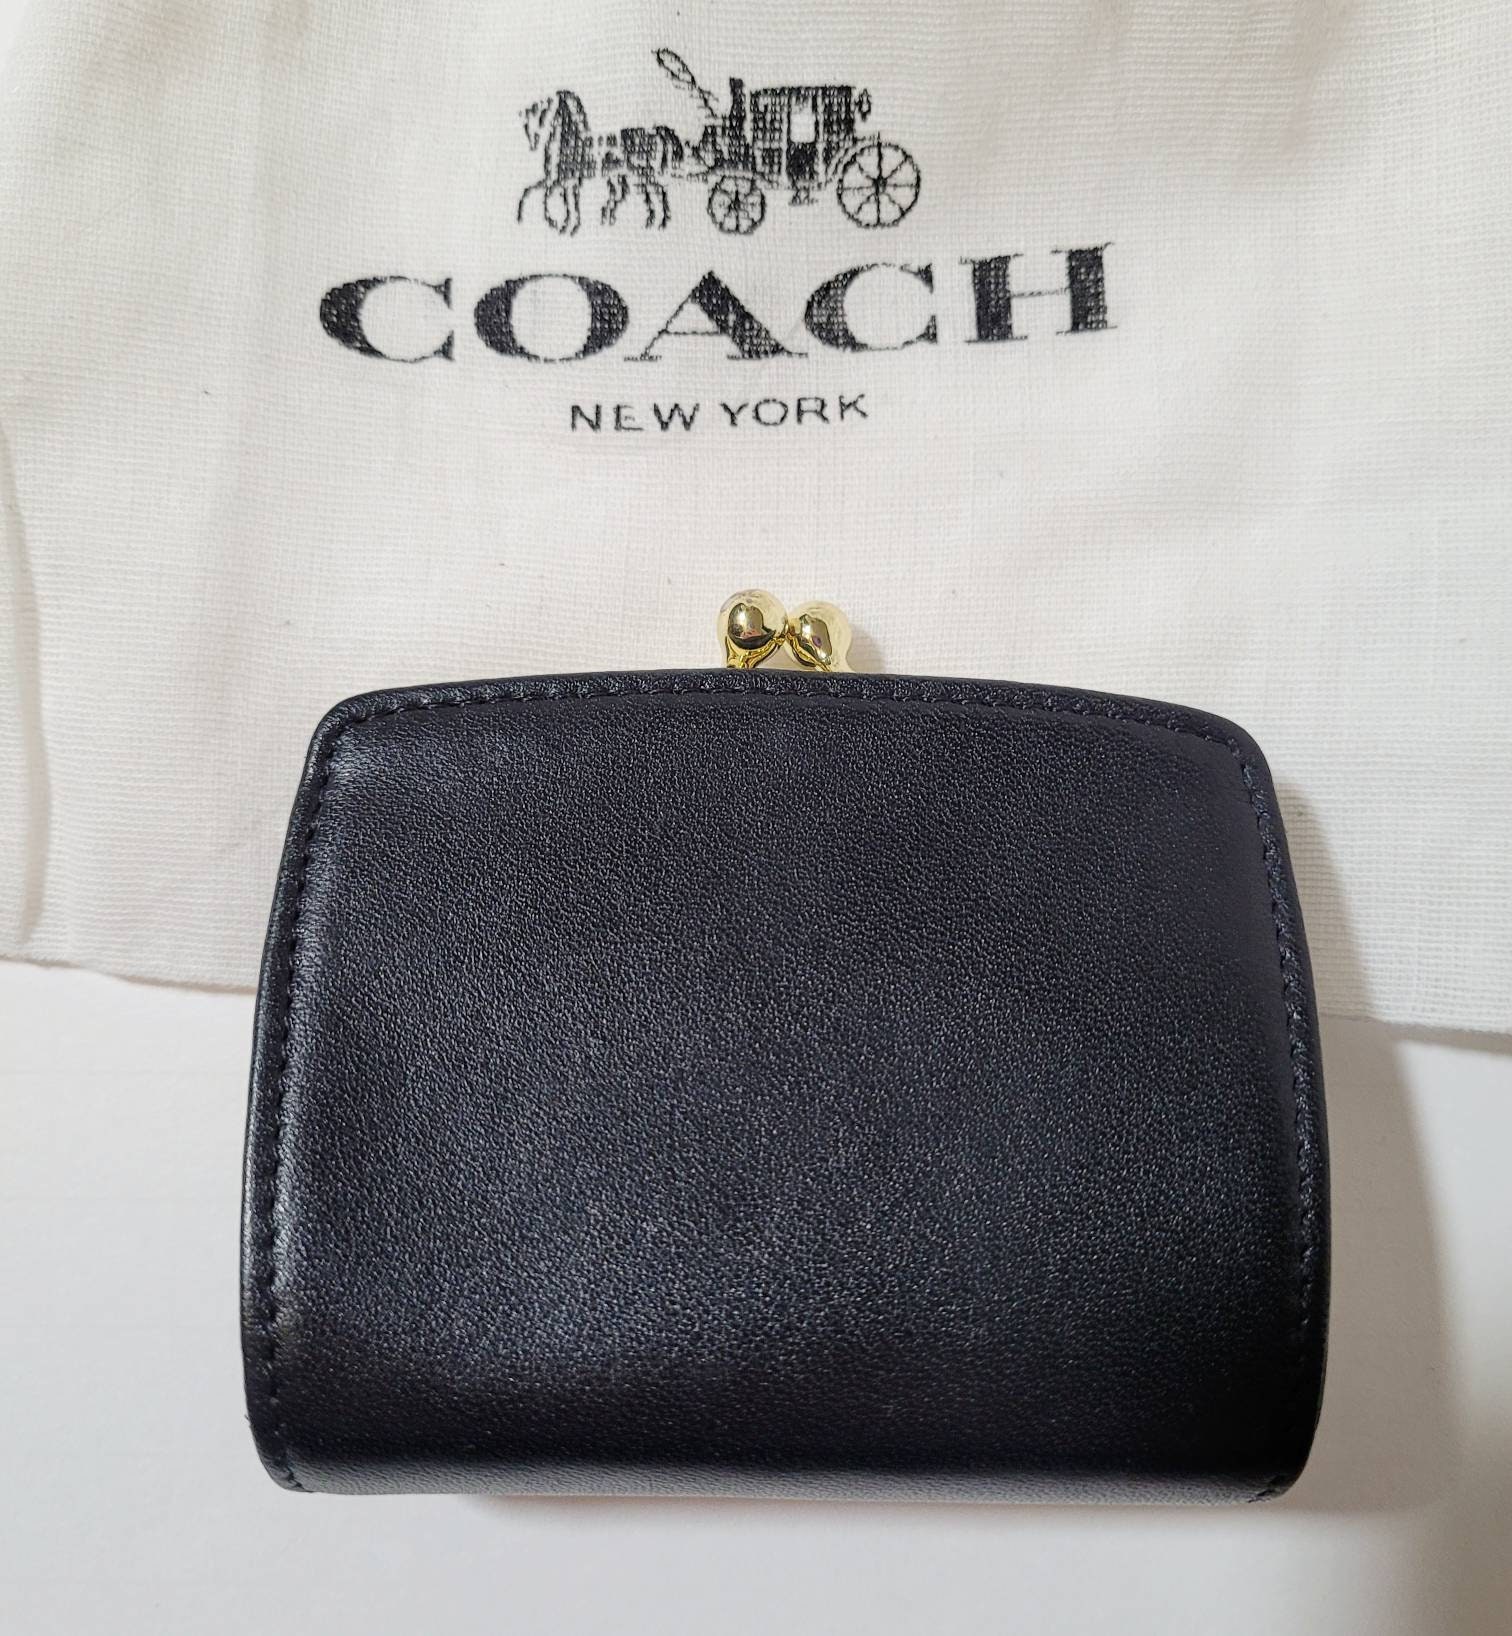 Coach Kisslock Coin Purse in Black Leather With Brass Hardware | Etsy